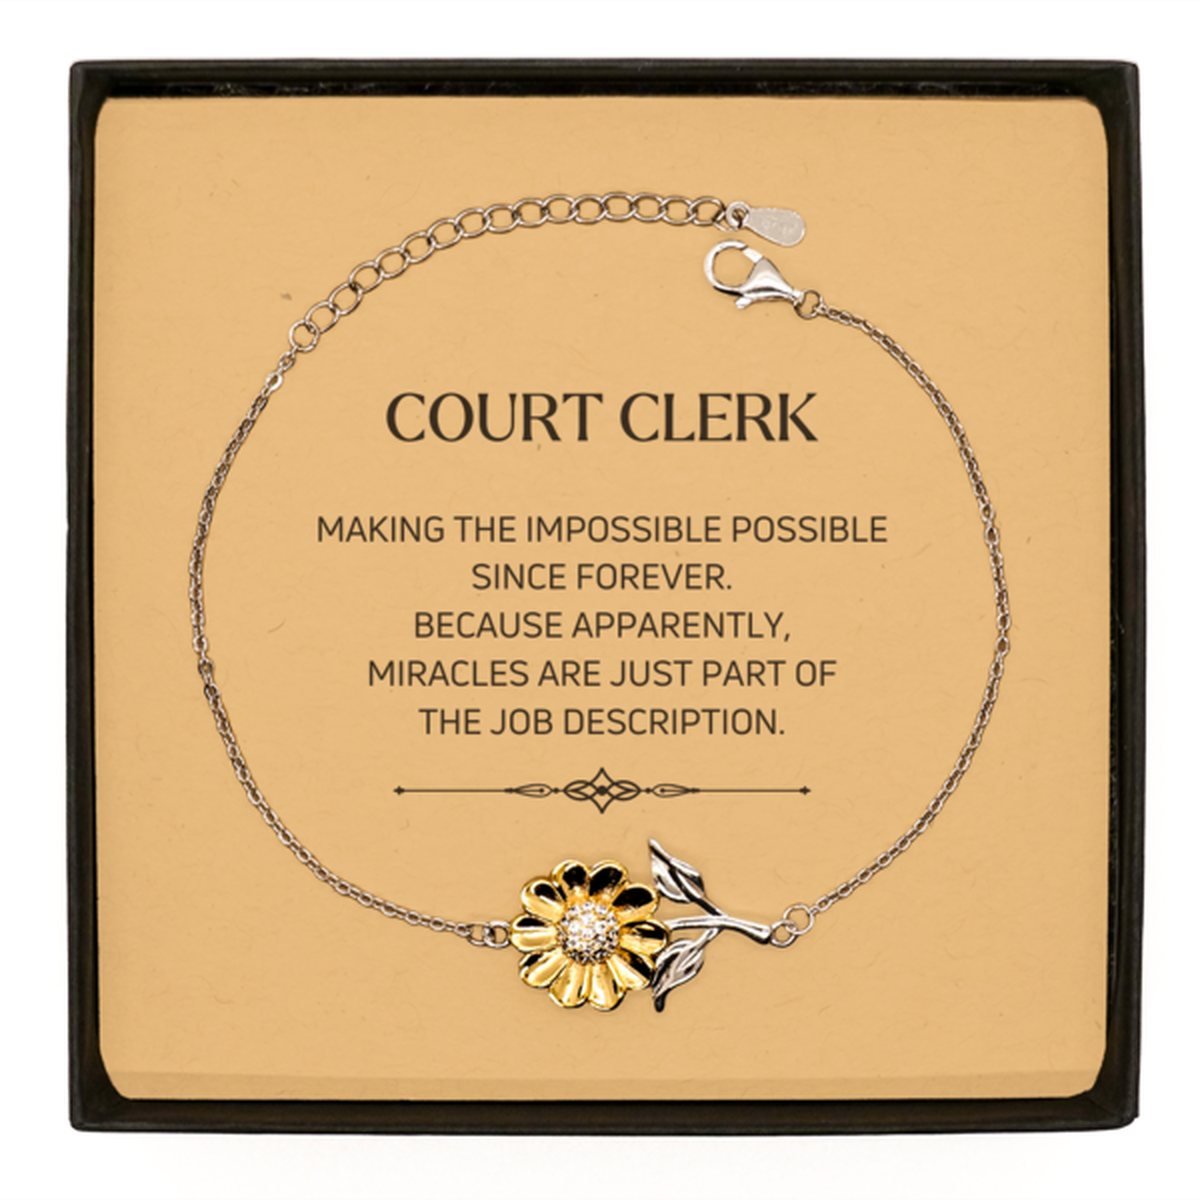 Funny Court Clerk Gifts, Miracles are just part of the job description, Inspirational Birthday Sunflower Bracelet For Court Clerk, Men, Women, Coworkers, Friends, Boss